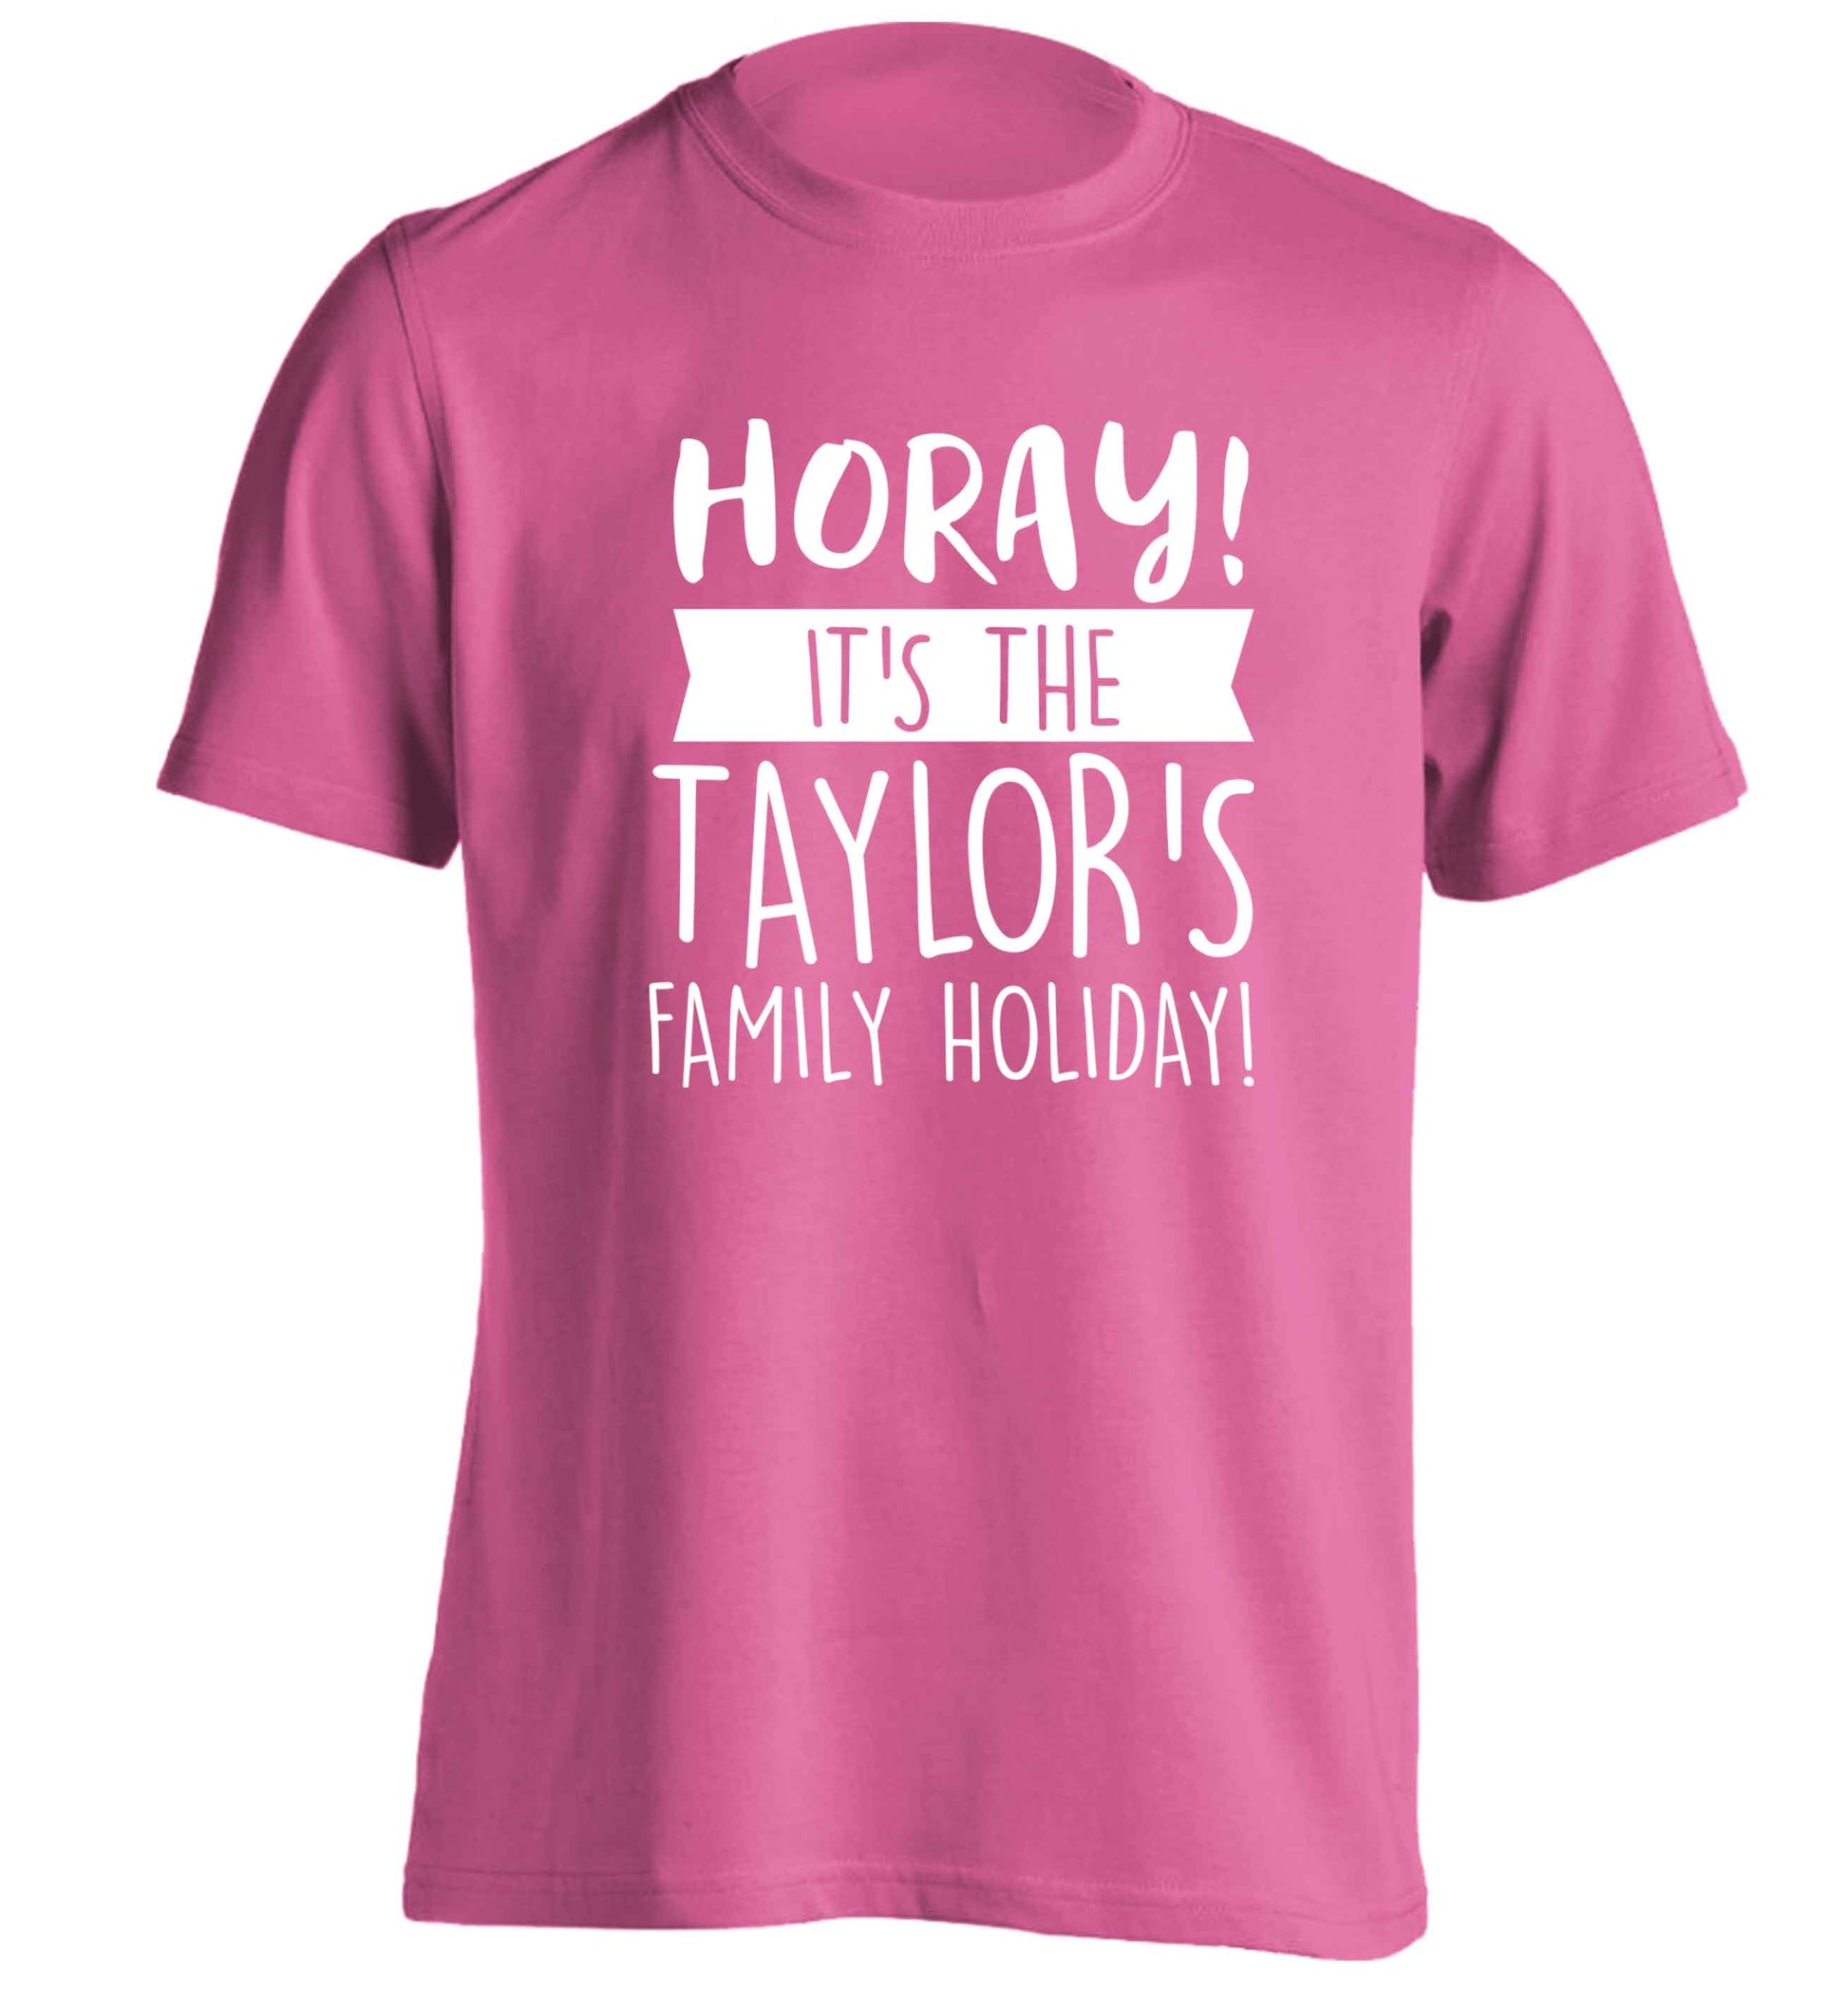 Horay it's the Taylor's family holiday! personalised item adults unisex pink Tshirt 2XL